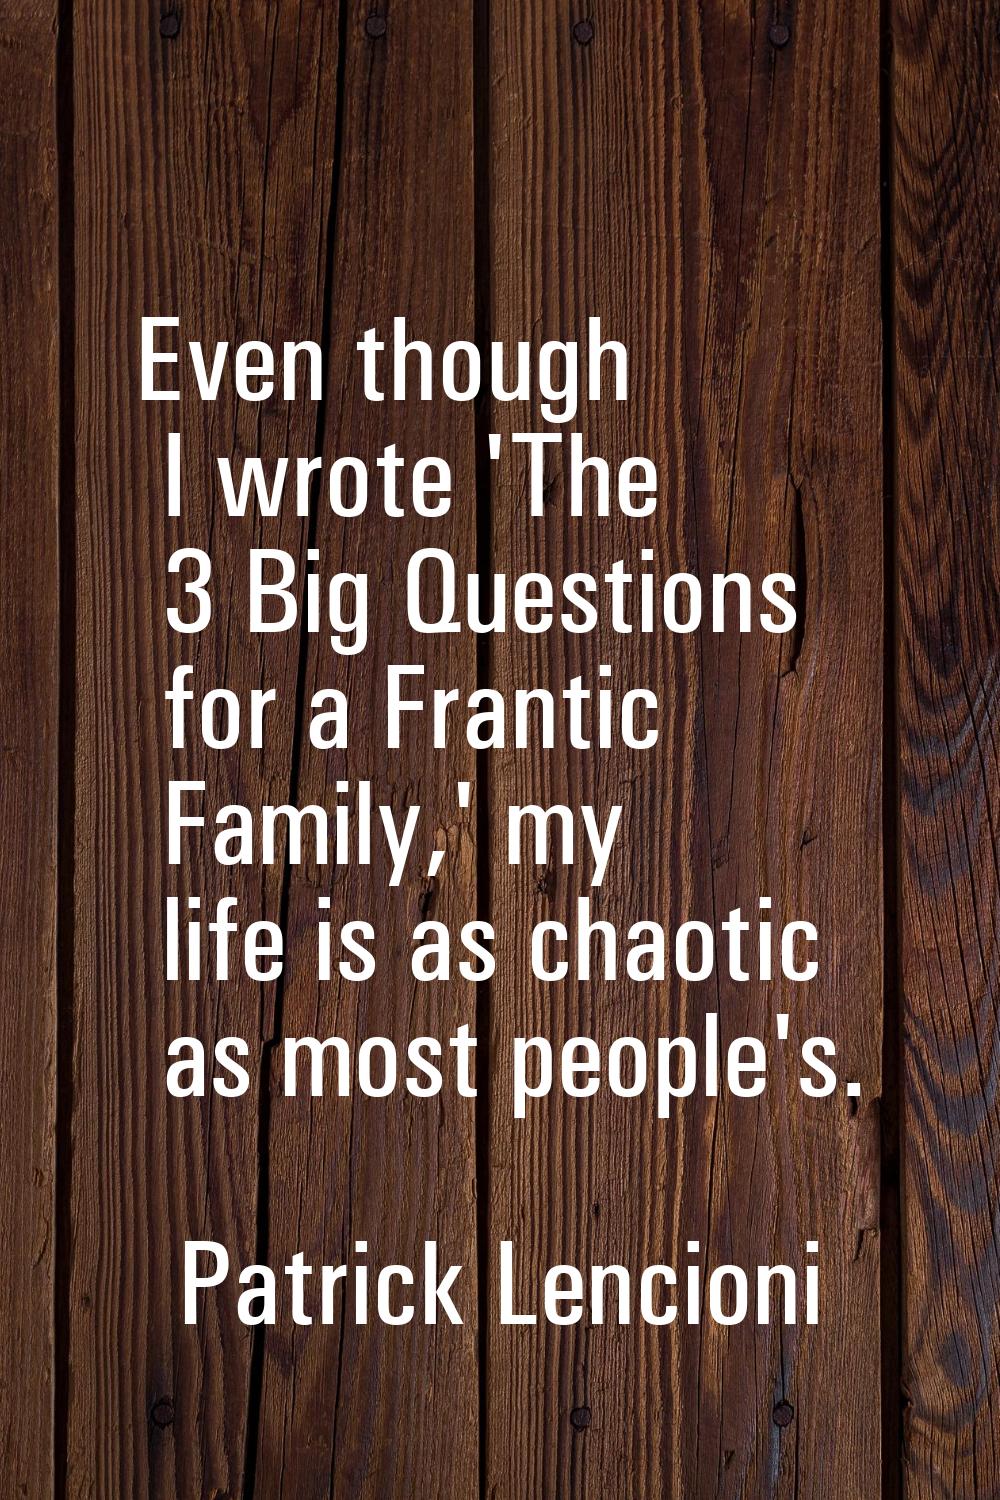 Even though I wrote 'The 3 Big Questions for a Frantic Family,' my life is as chaotic as most peopl